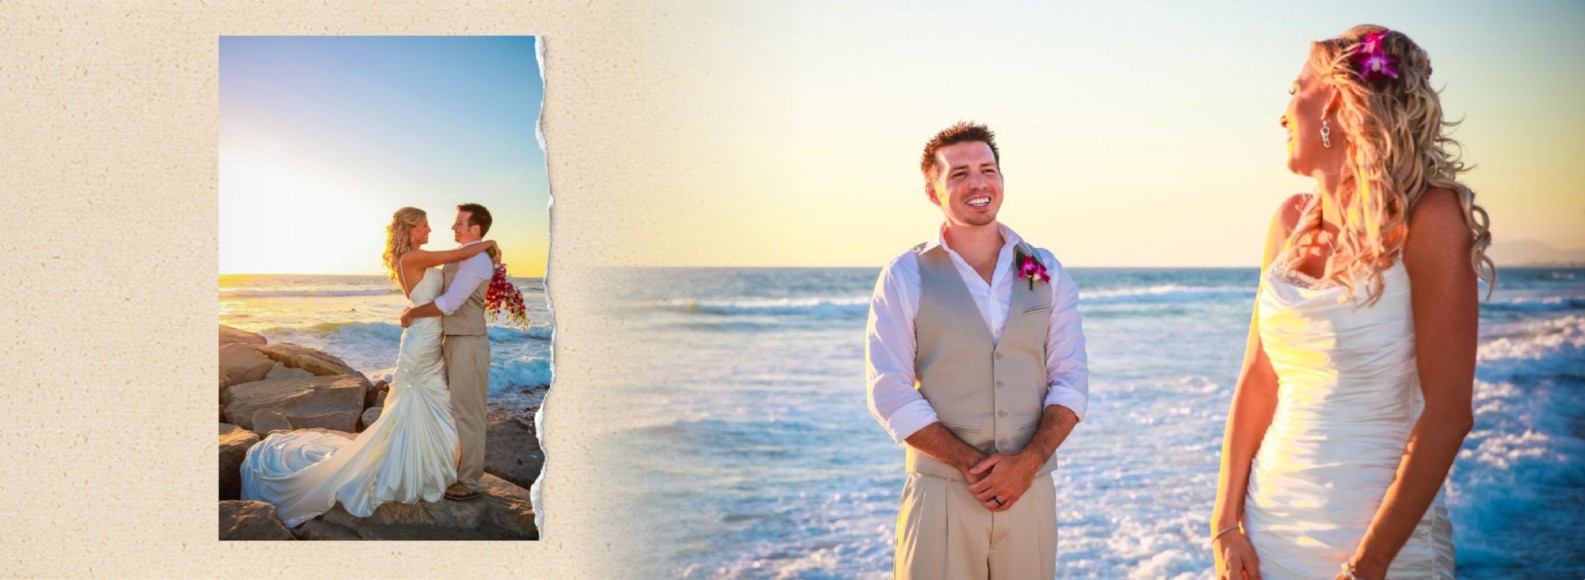 Brooke & Ryan's Wedding Book Compliments their Wedding by San Diego Wedding Photographers Andrew Abouna - Pages 014-015